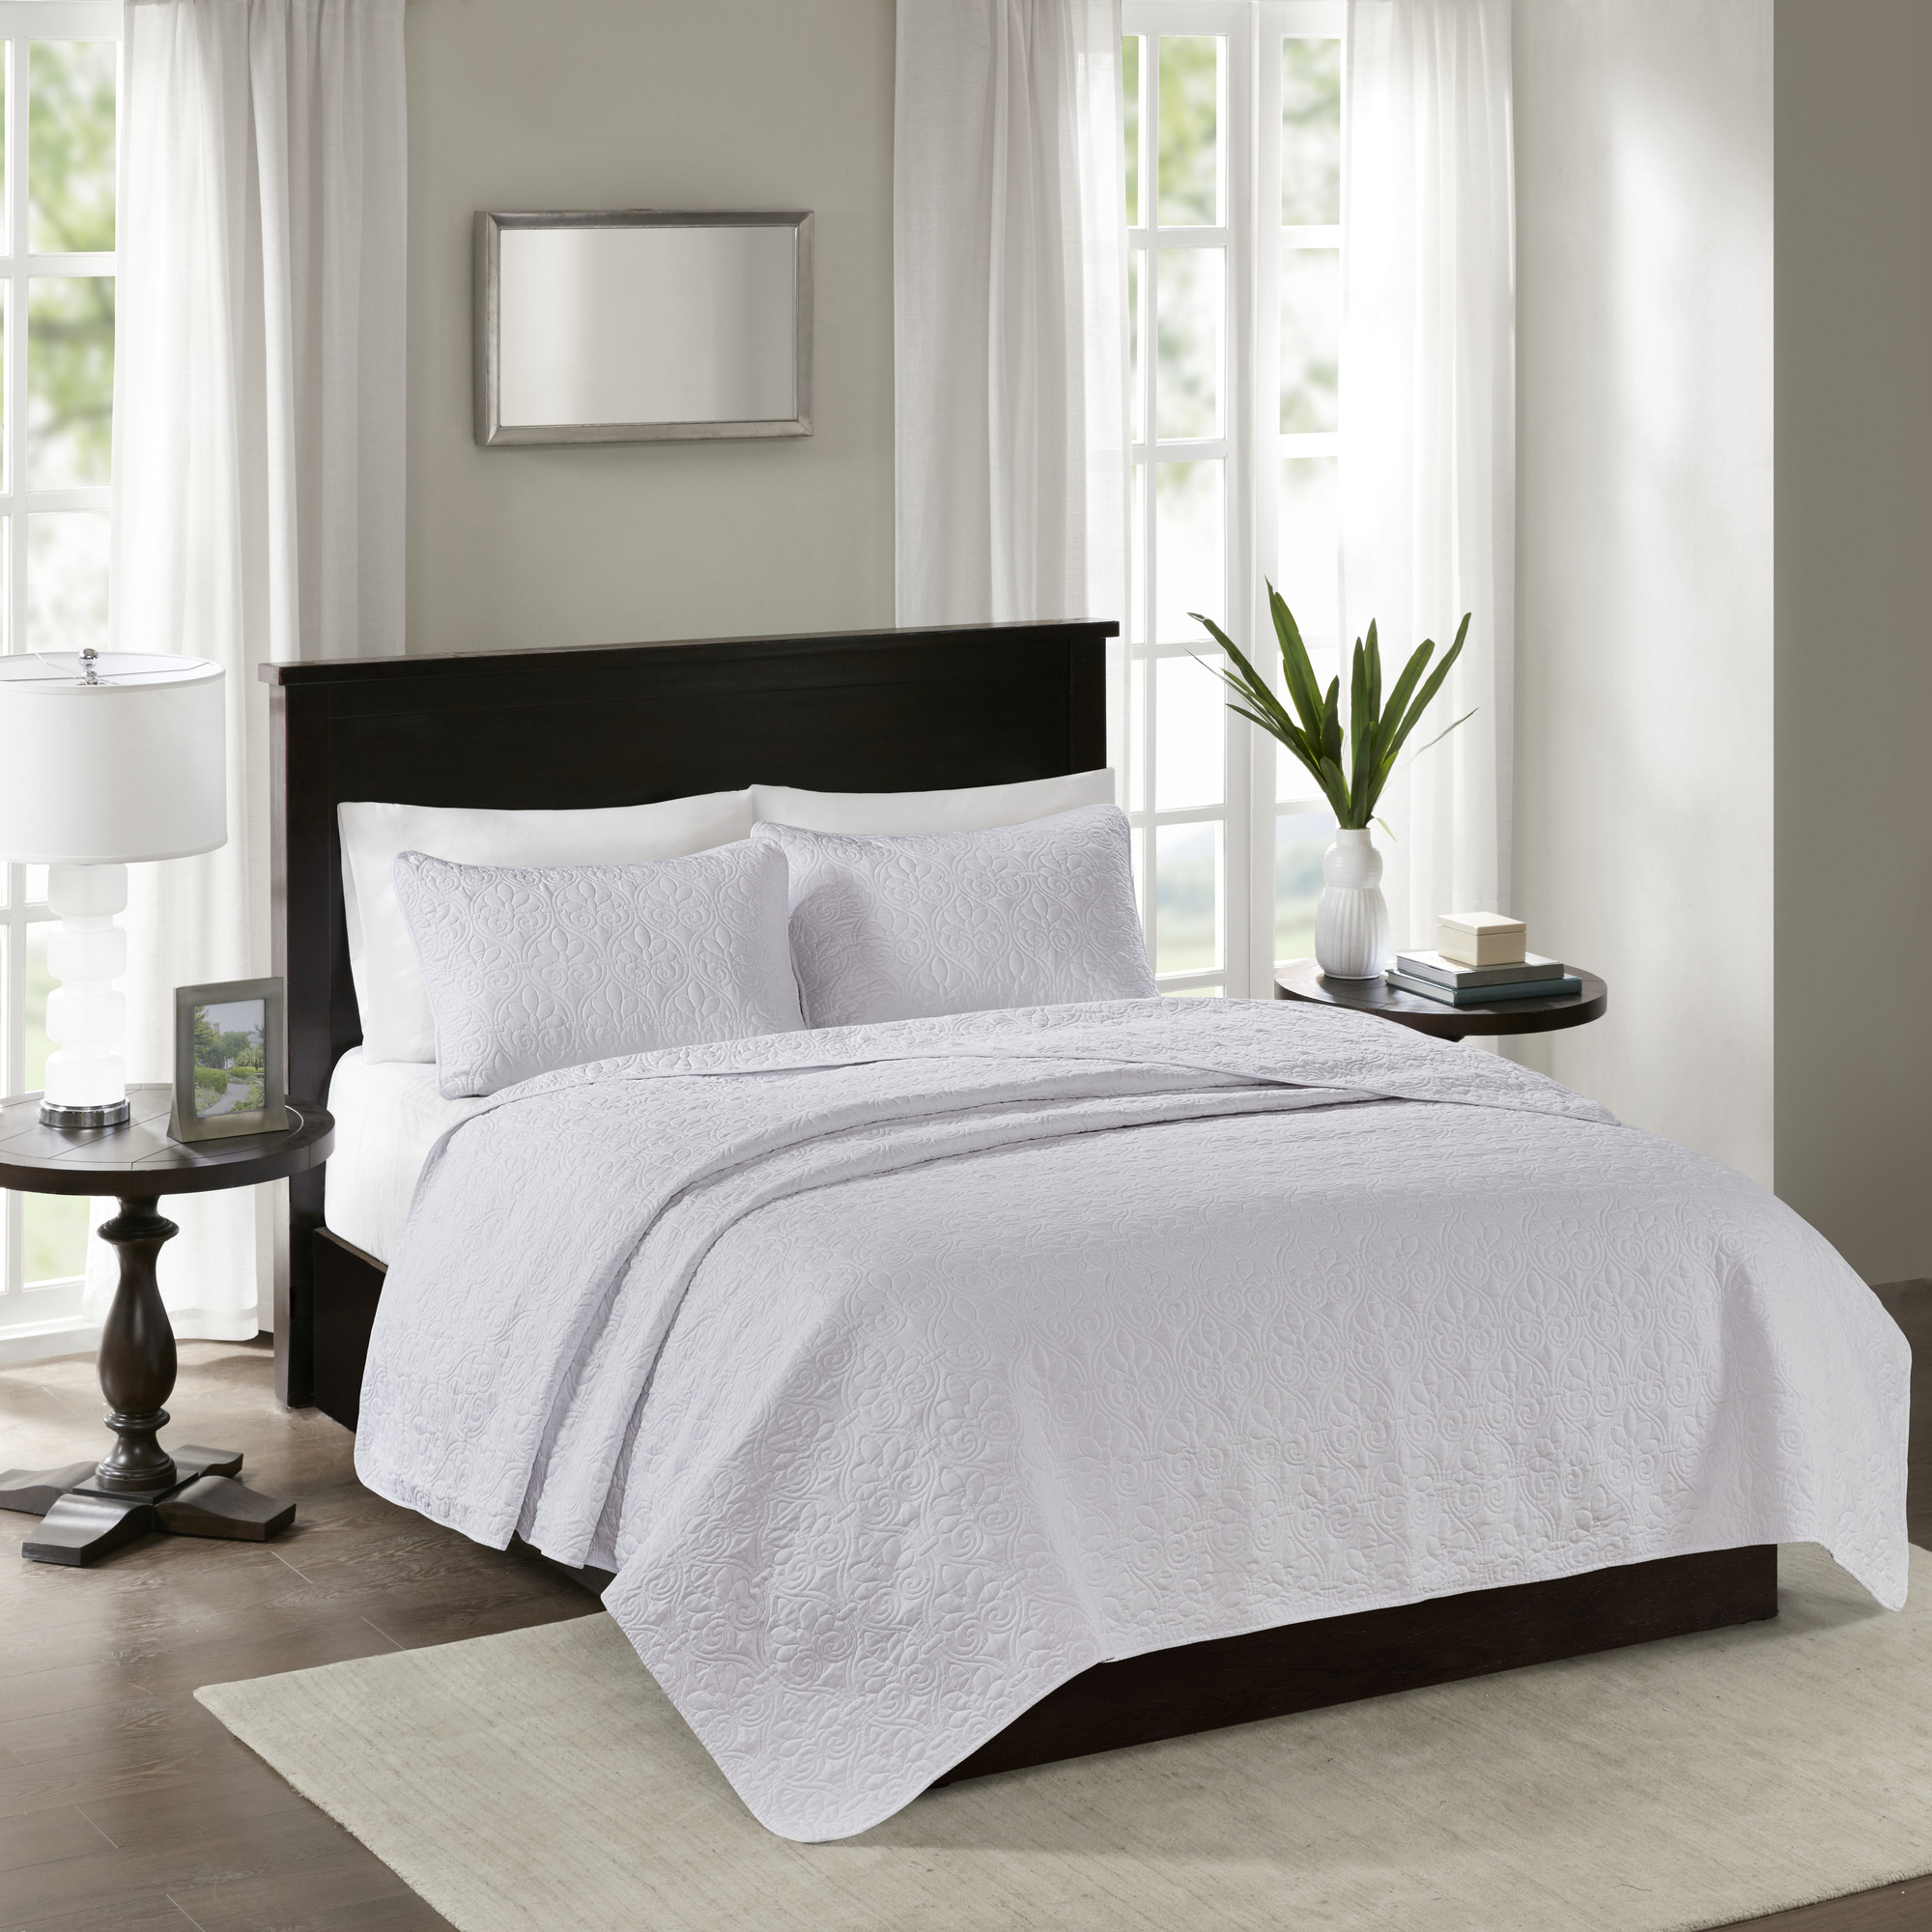 Home Essence Vancouver Super Soft Reversible Coverlet Set, King/Cal King, White - image 2 of 14